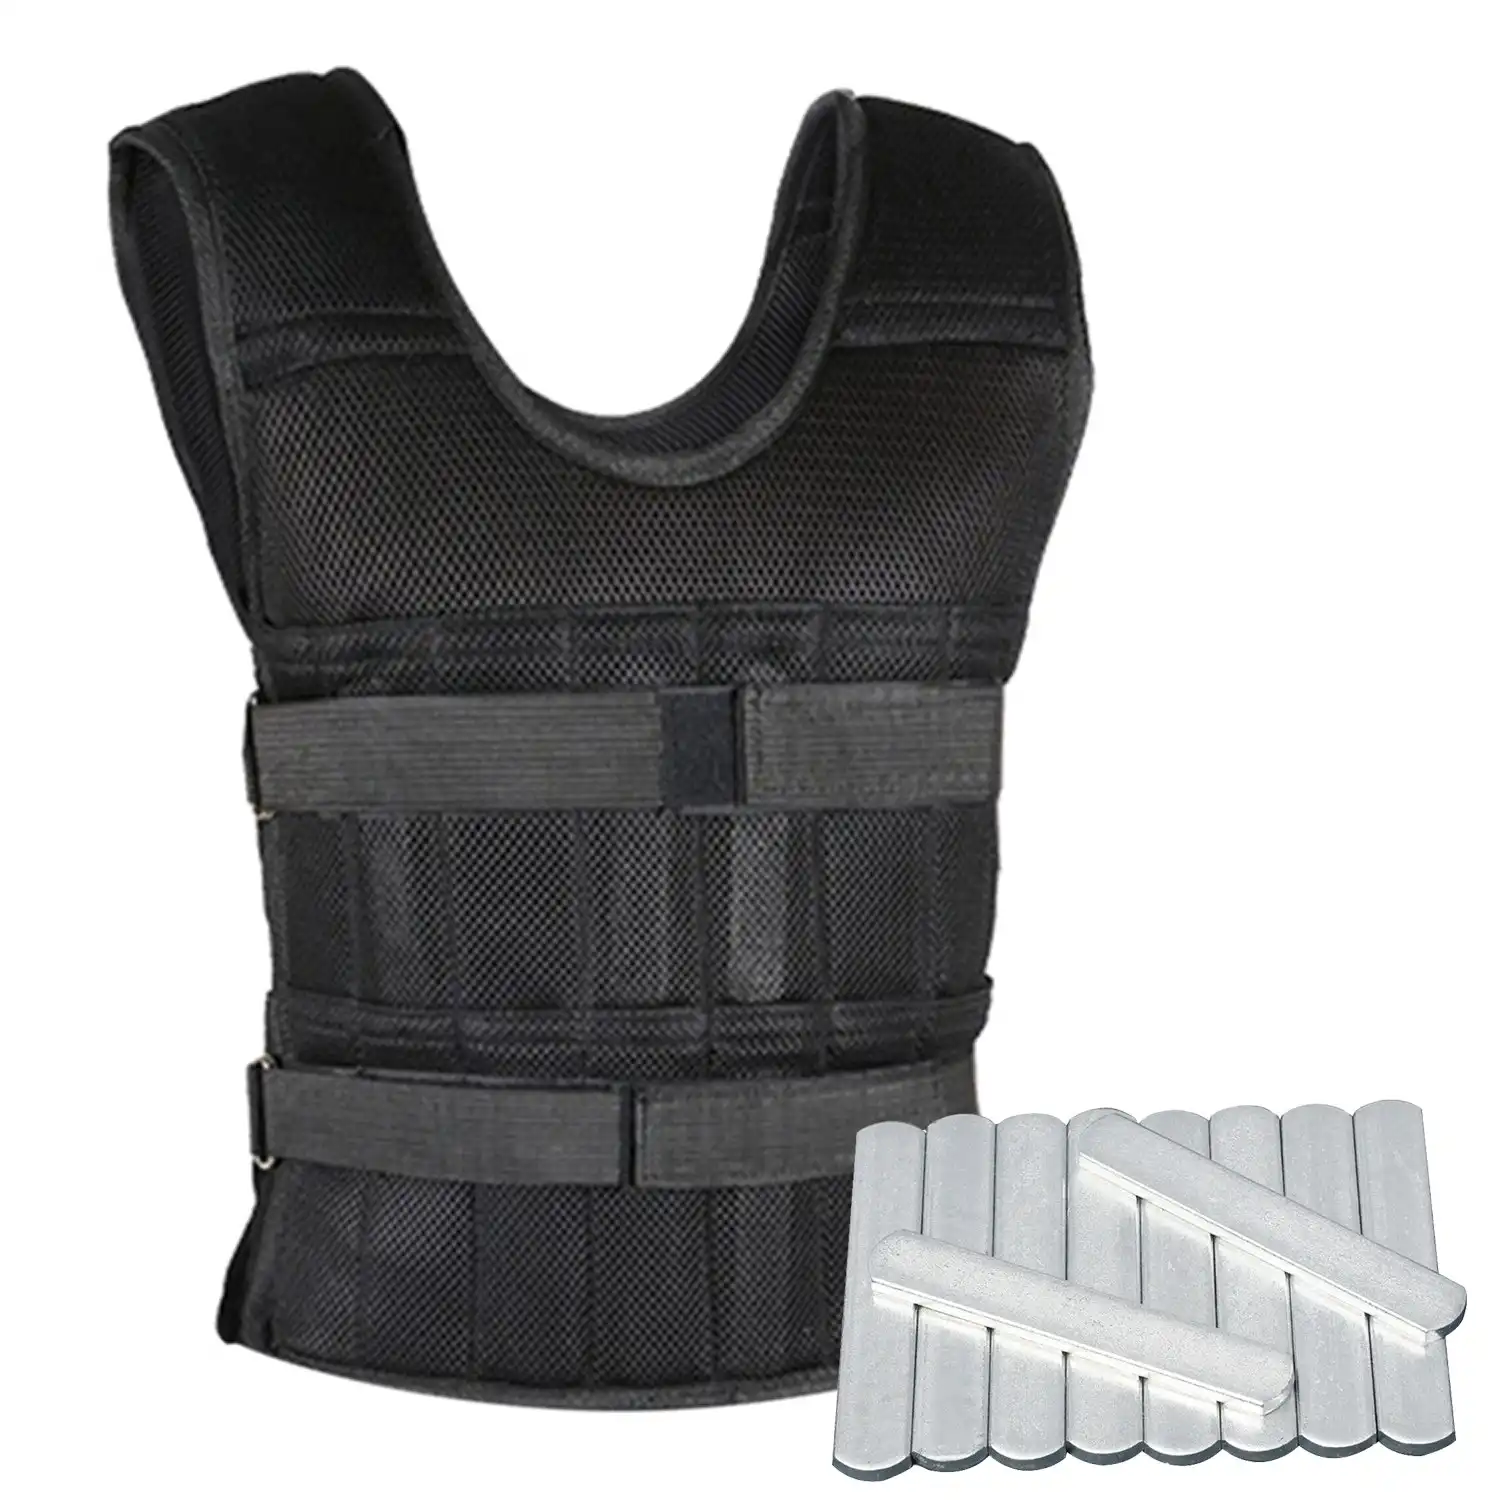 30kg Steel Plate Weight Vest Weighted Resistance Training Load Bearing Running Gym